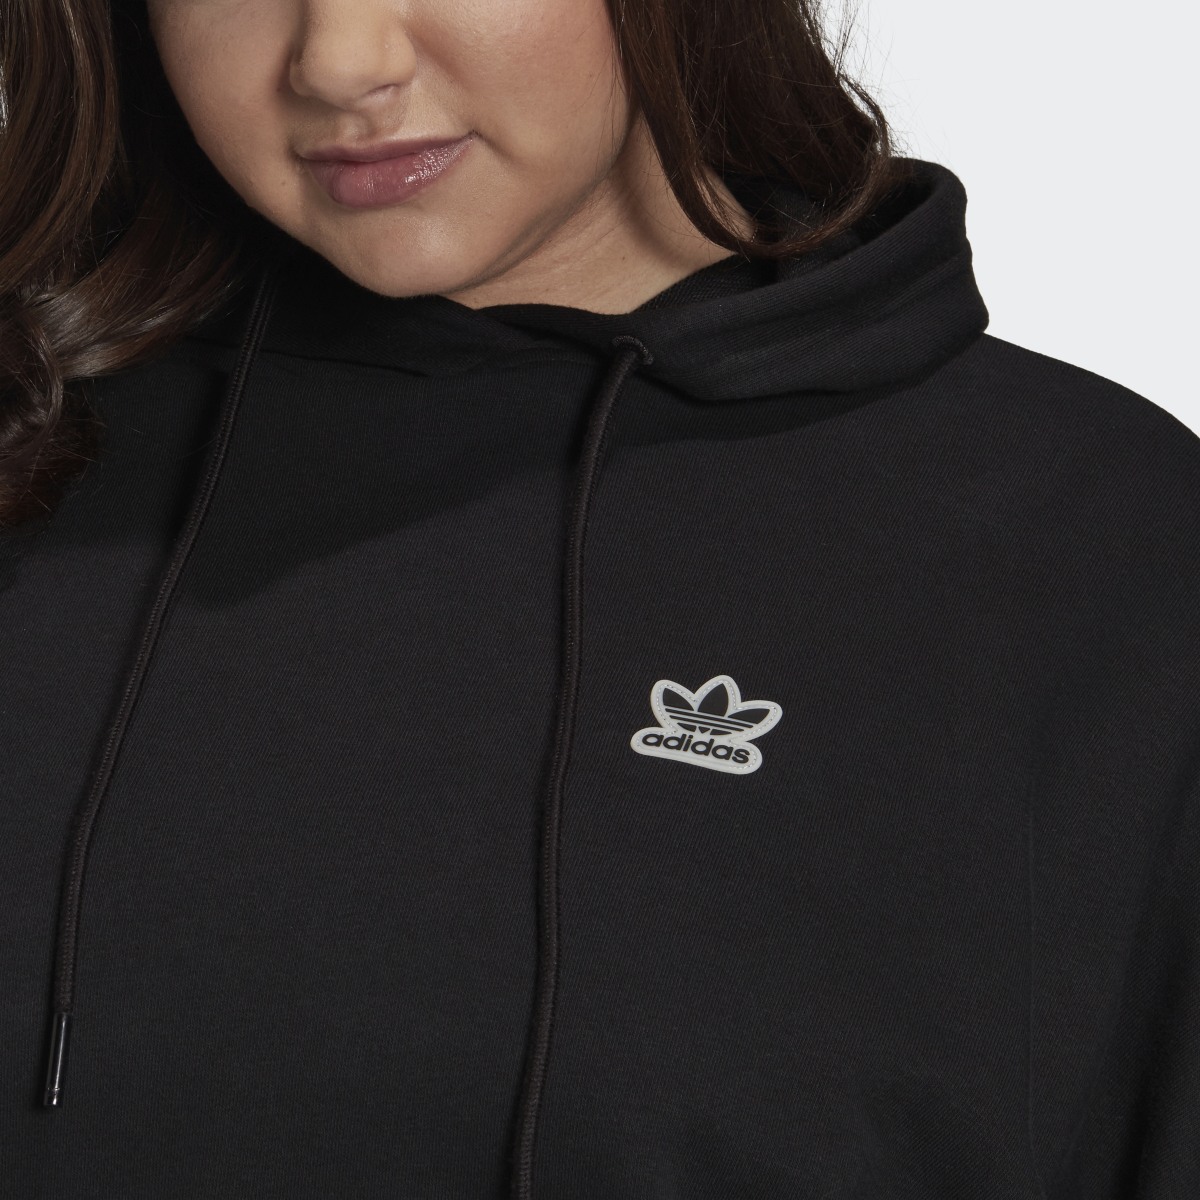 Adidas Cropped Hoodie (Plus Size). 7